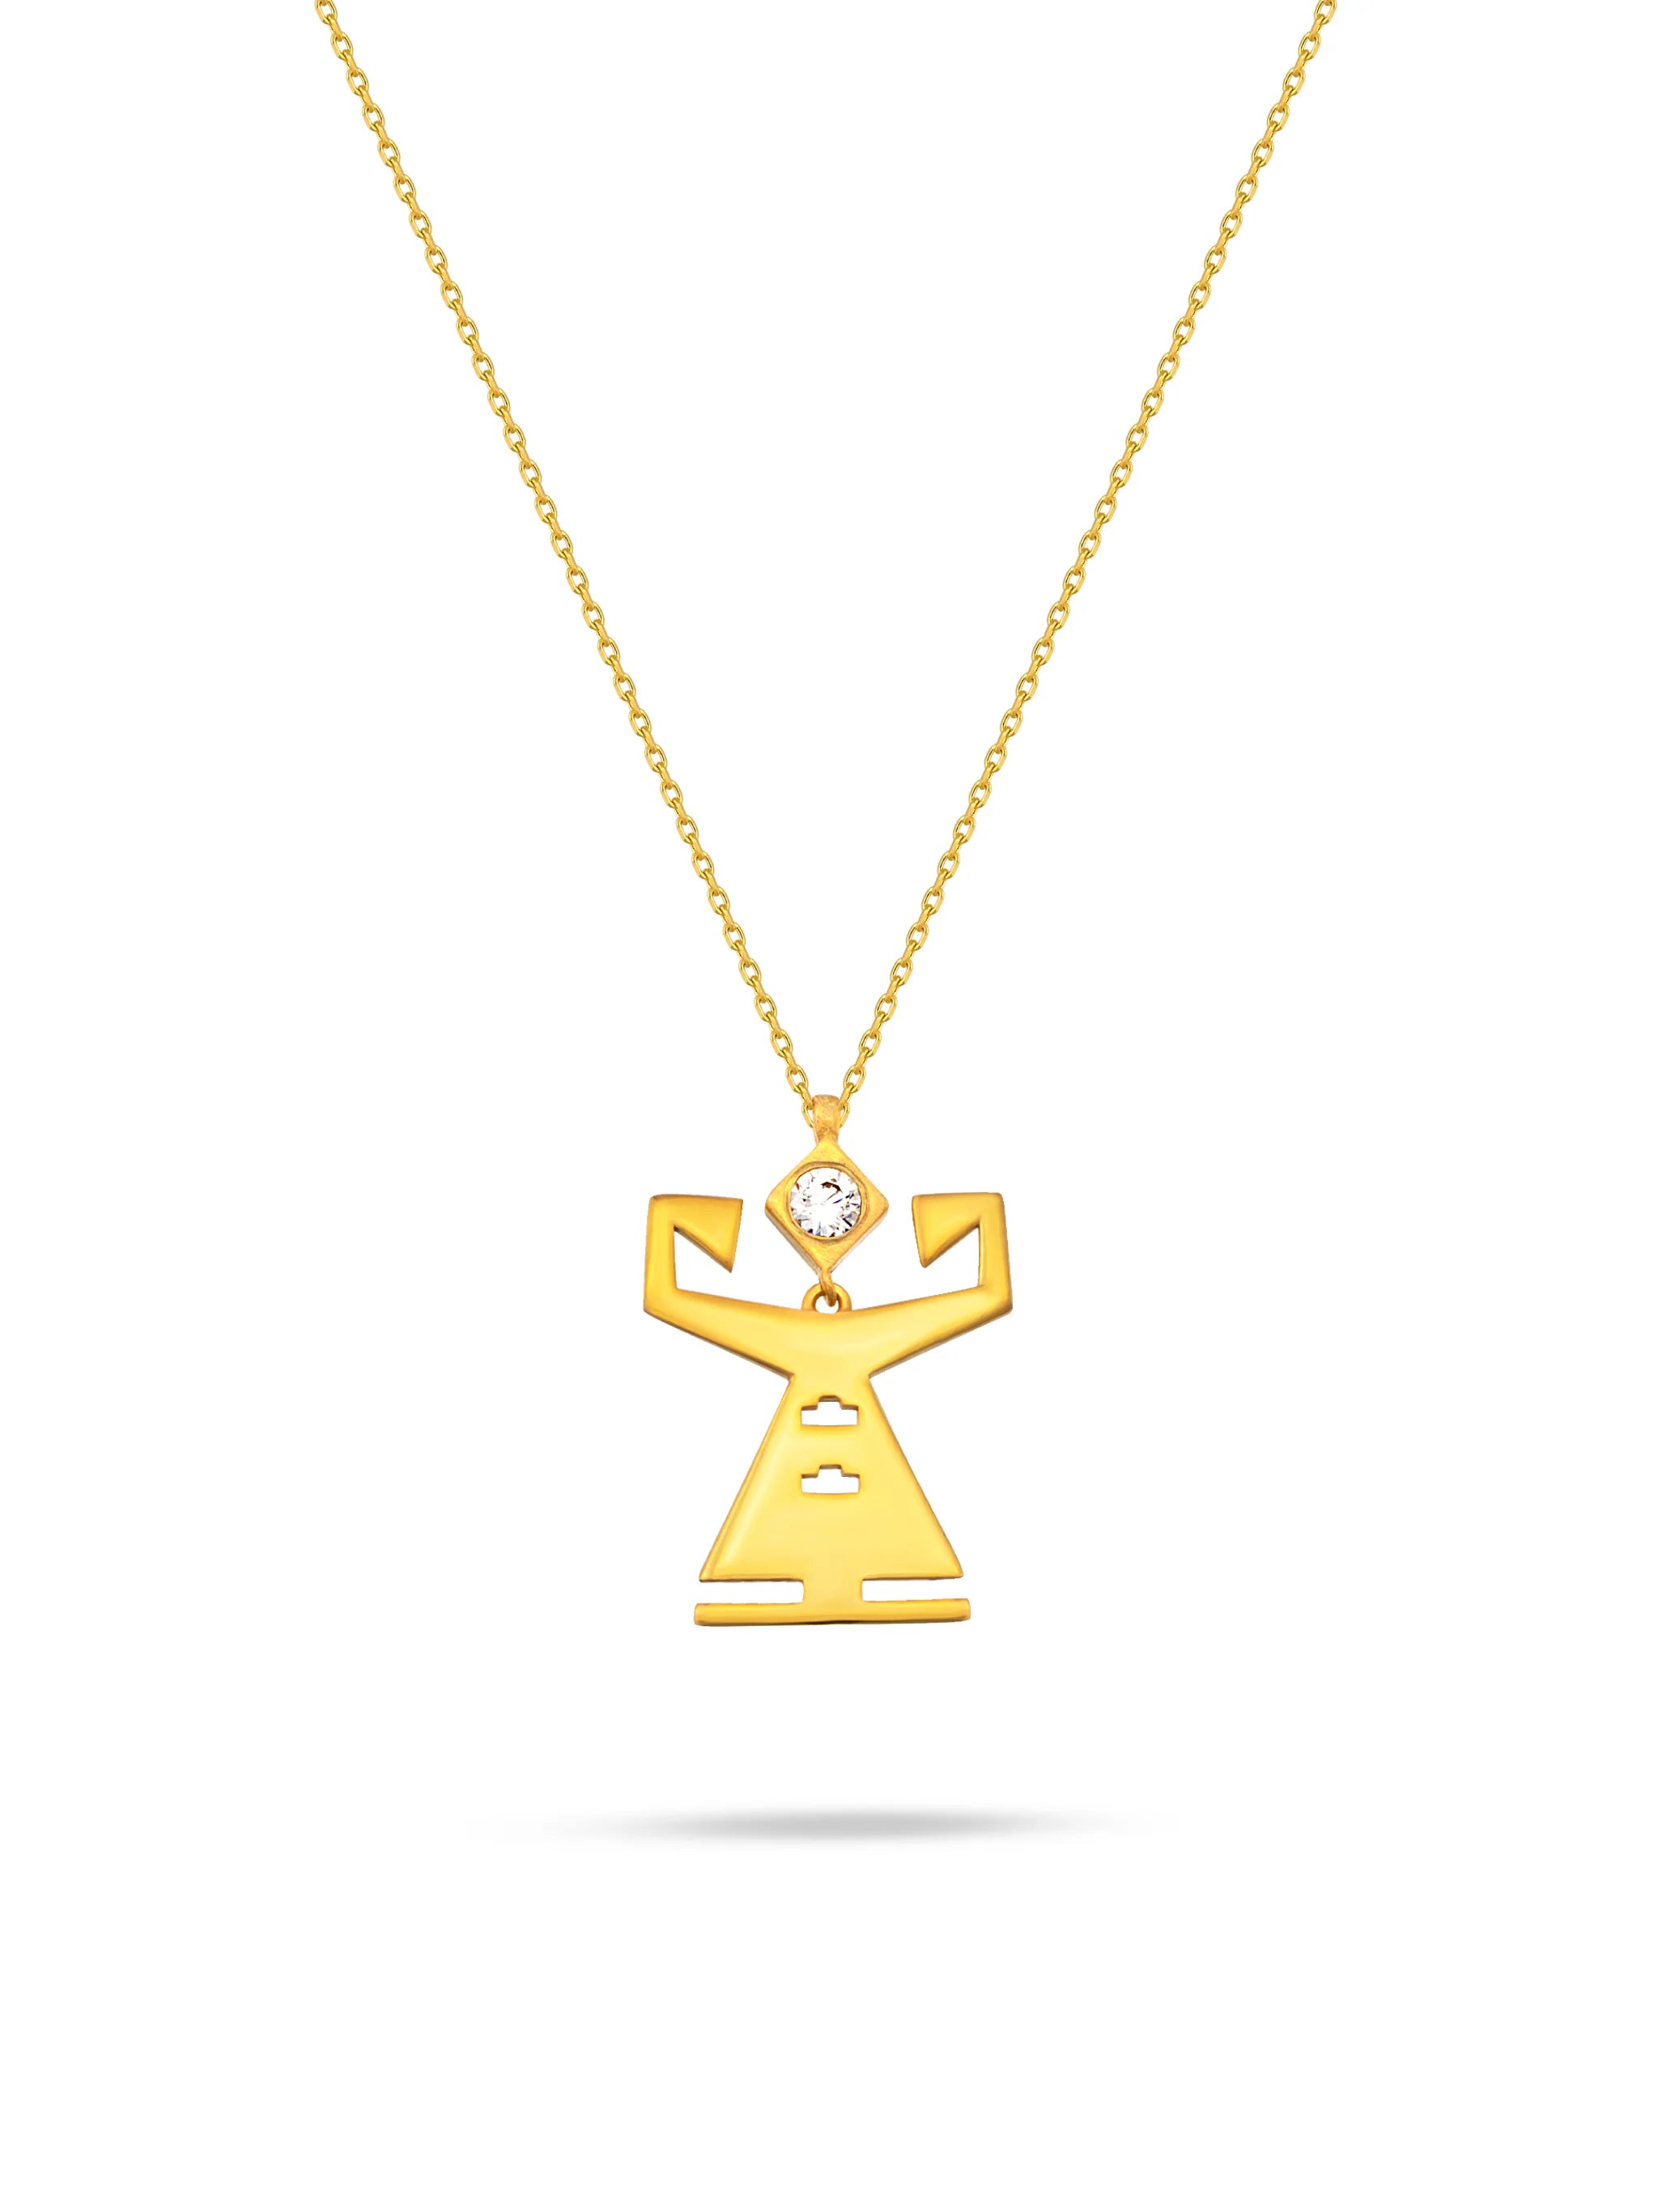 The Symbols of Change Necklace